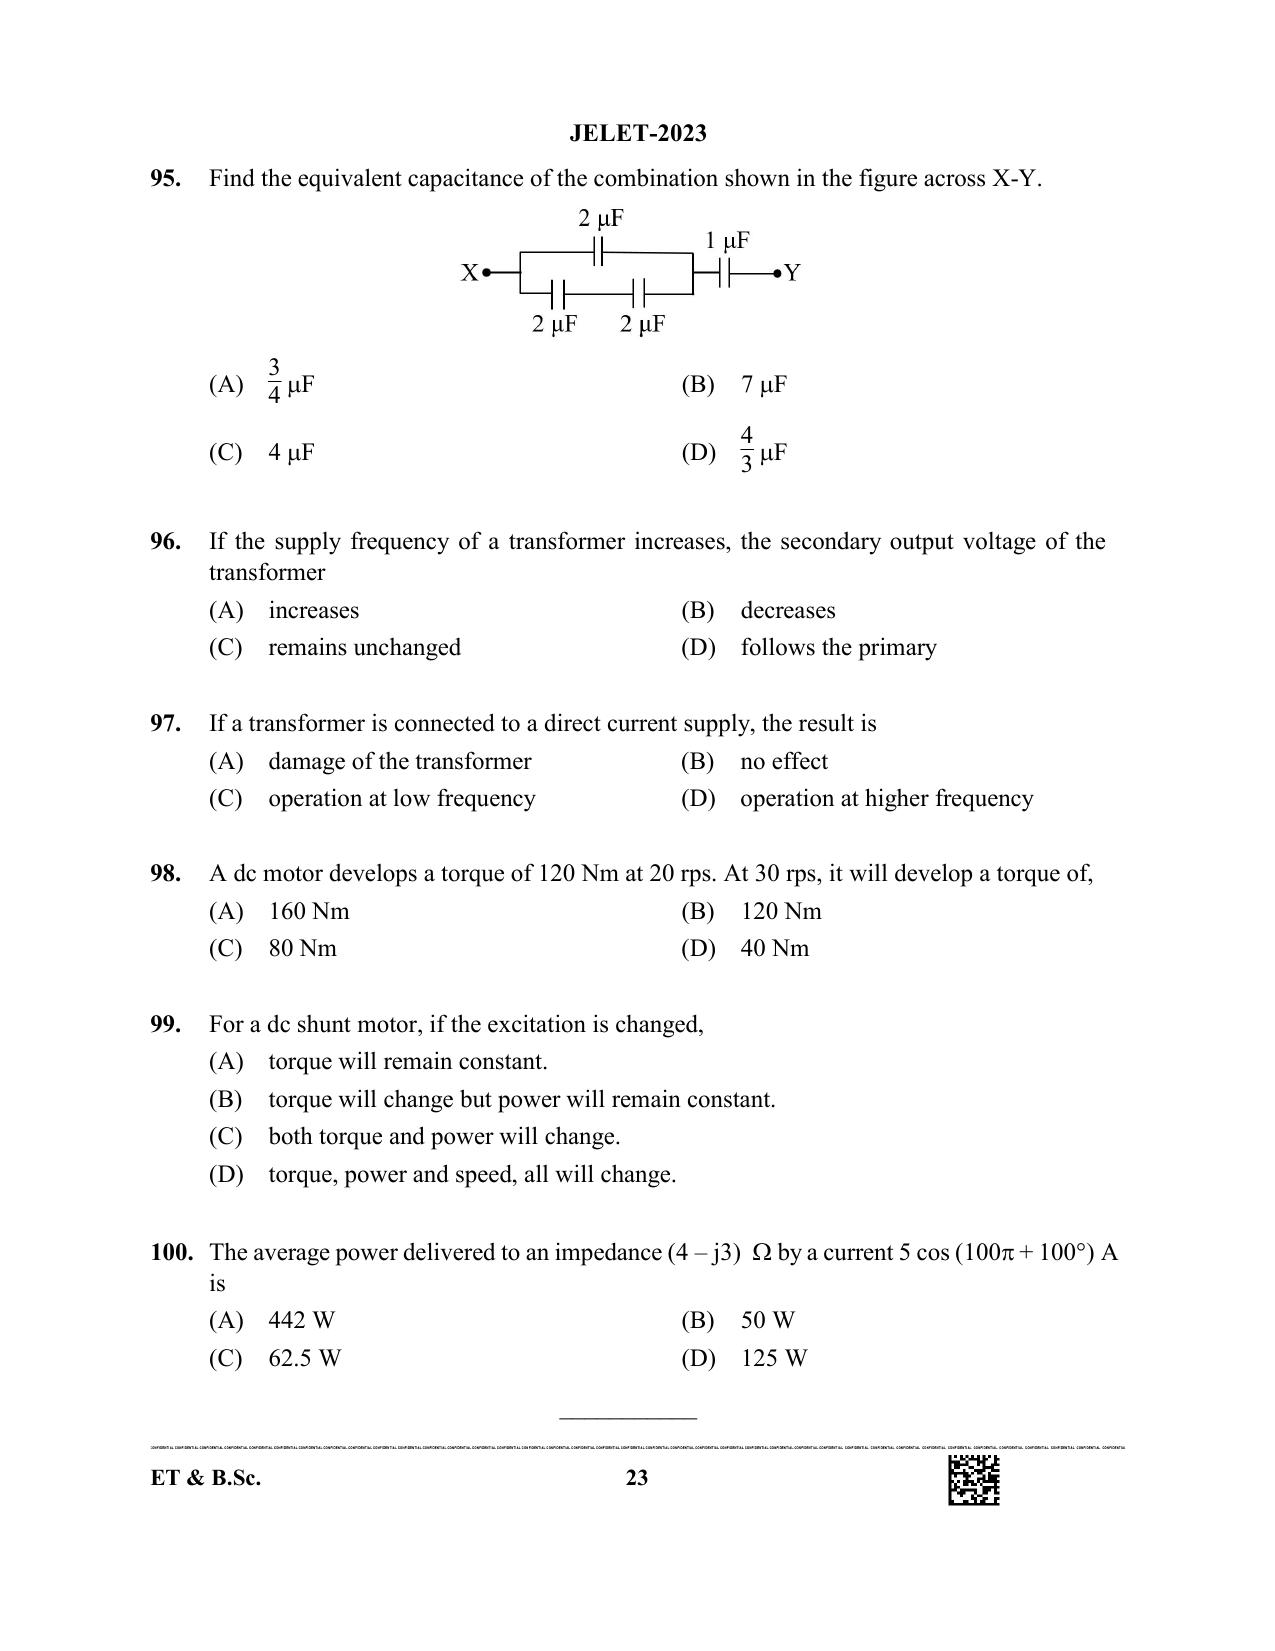 WBJEE JELET 2023 Paper I (ET & BSC) Question Papers - Page 23